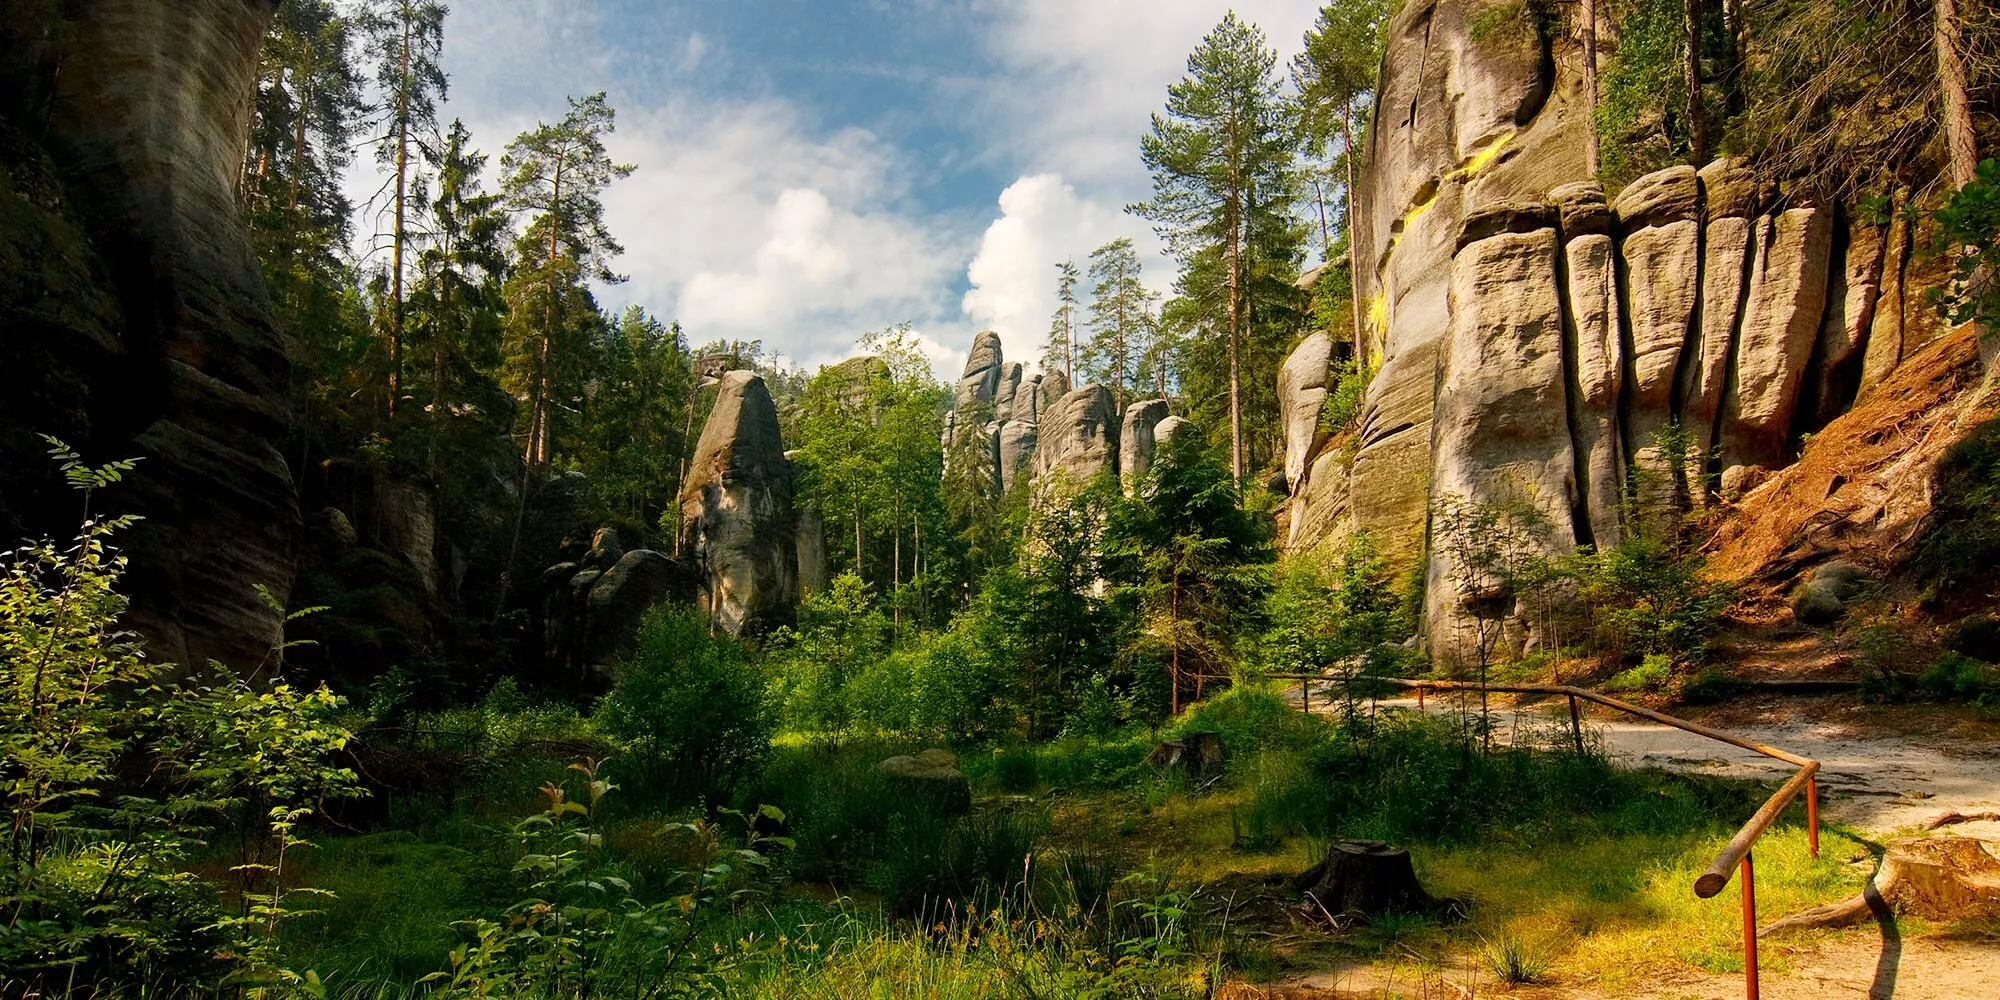 Adrspach to Teplice Rock Towns in Czech Republic, Europe | Nature Reserves,Trekking & Hiking - Rated 4.6